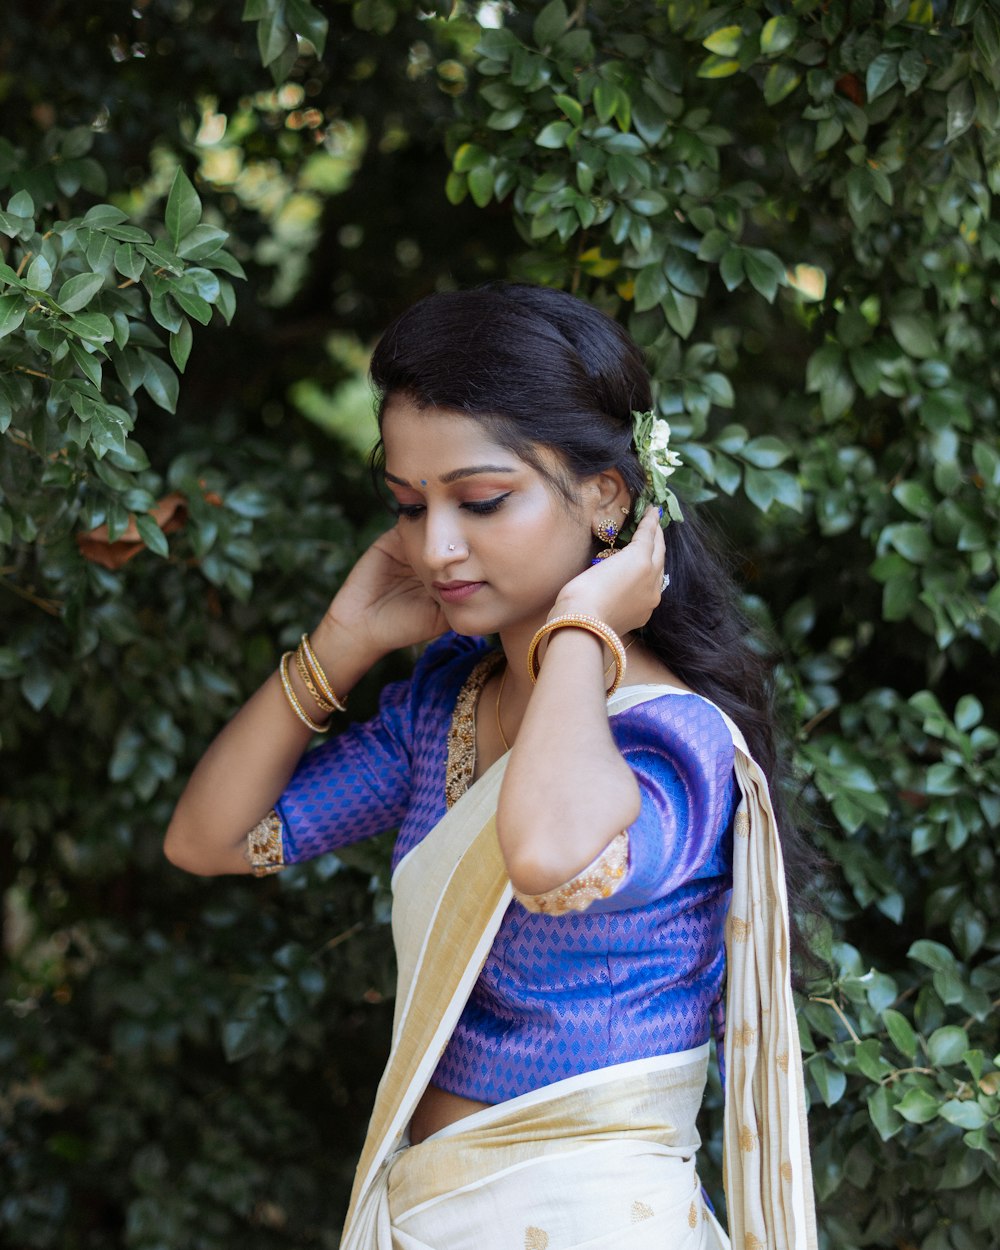 a woman in a blue and white sari